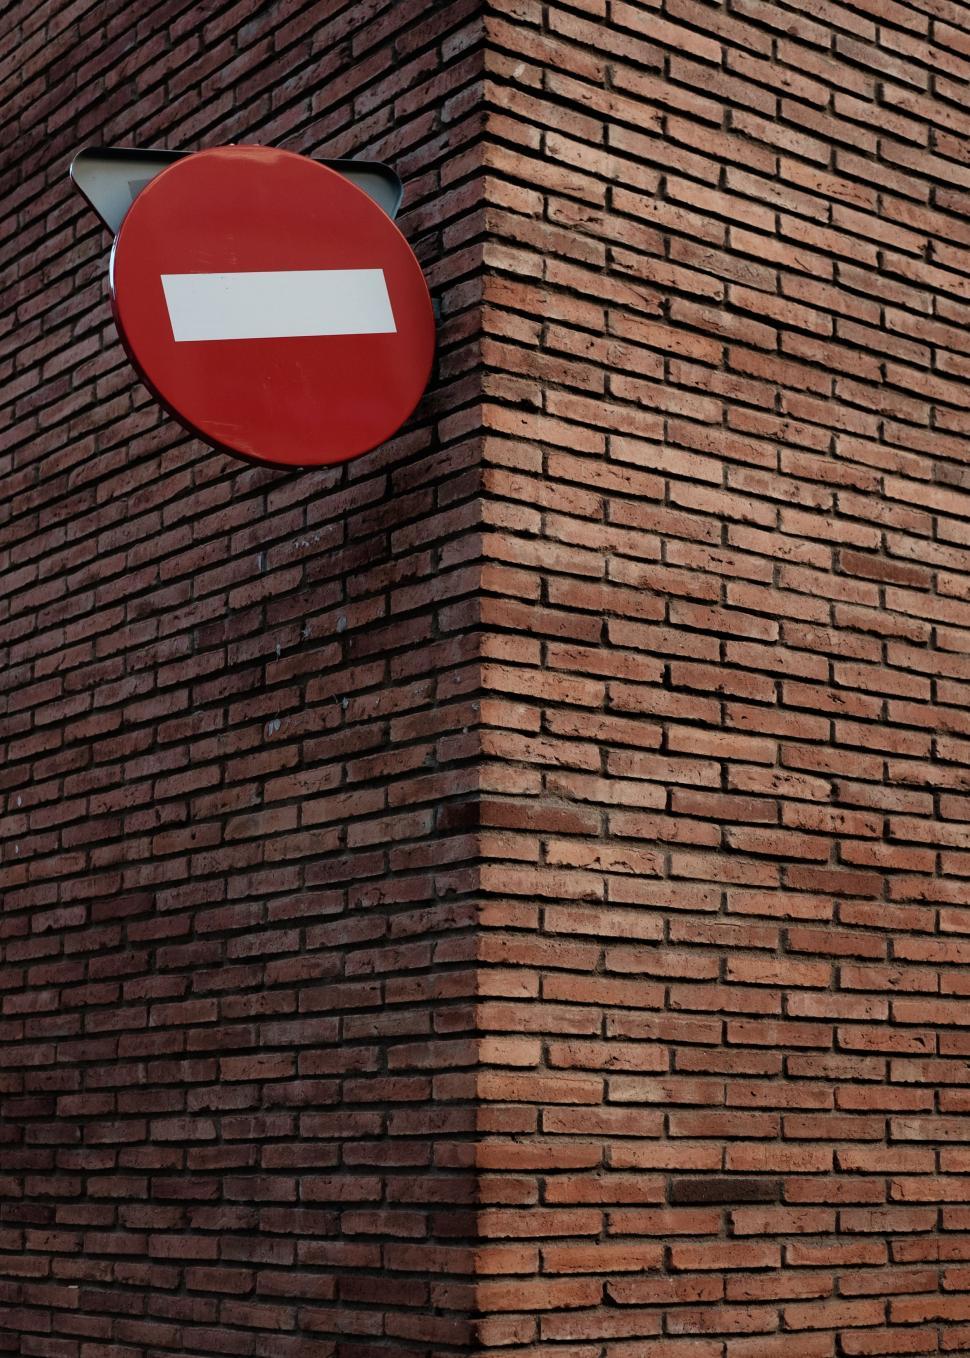 Free Image of Brick Building With No Entry Sign 